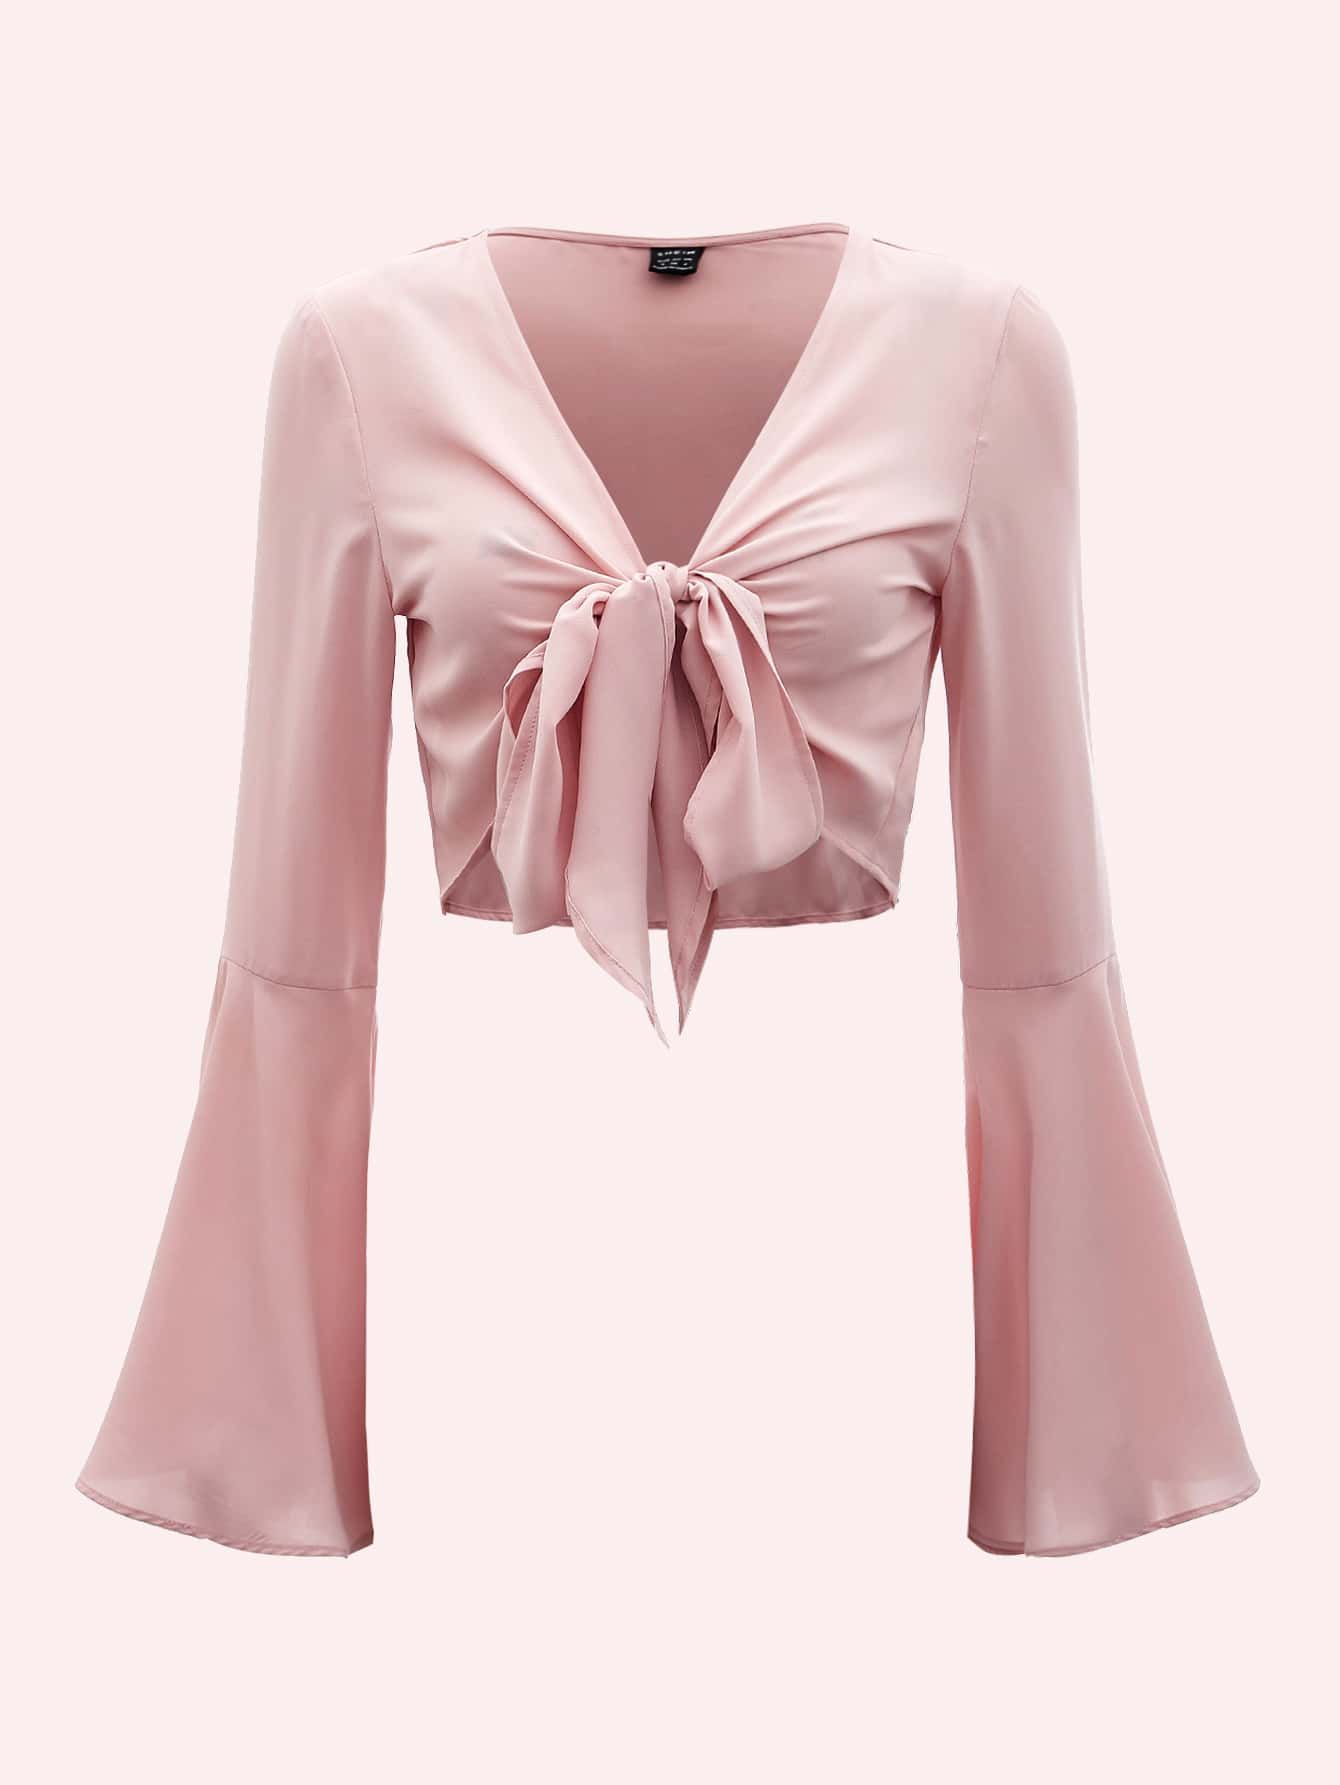 Best 15 Light Pink Blouse Outfit Ideas: Style Guide for Women